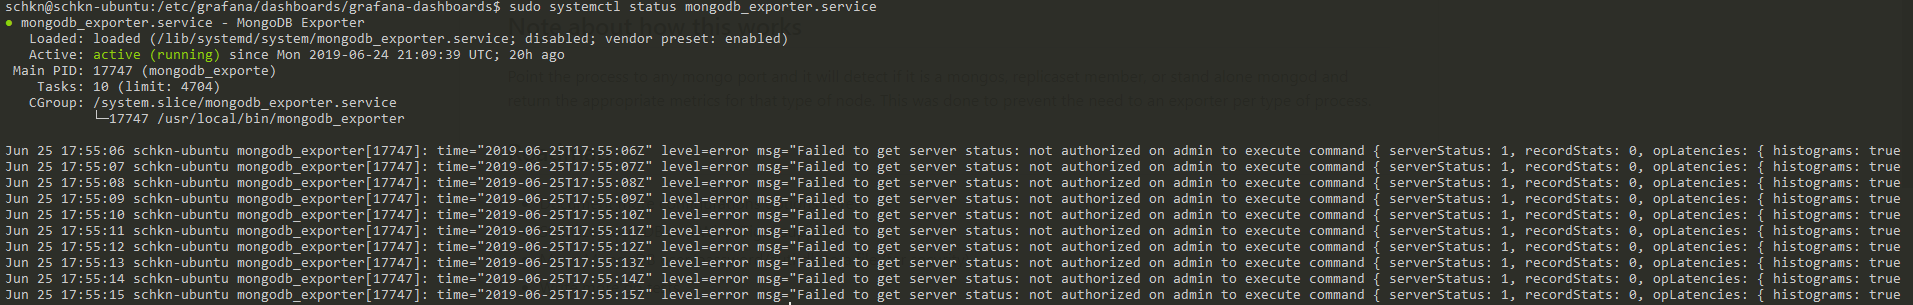 Failed to get server status: not authorized on admin to execute command